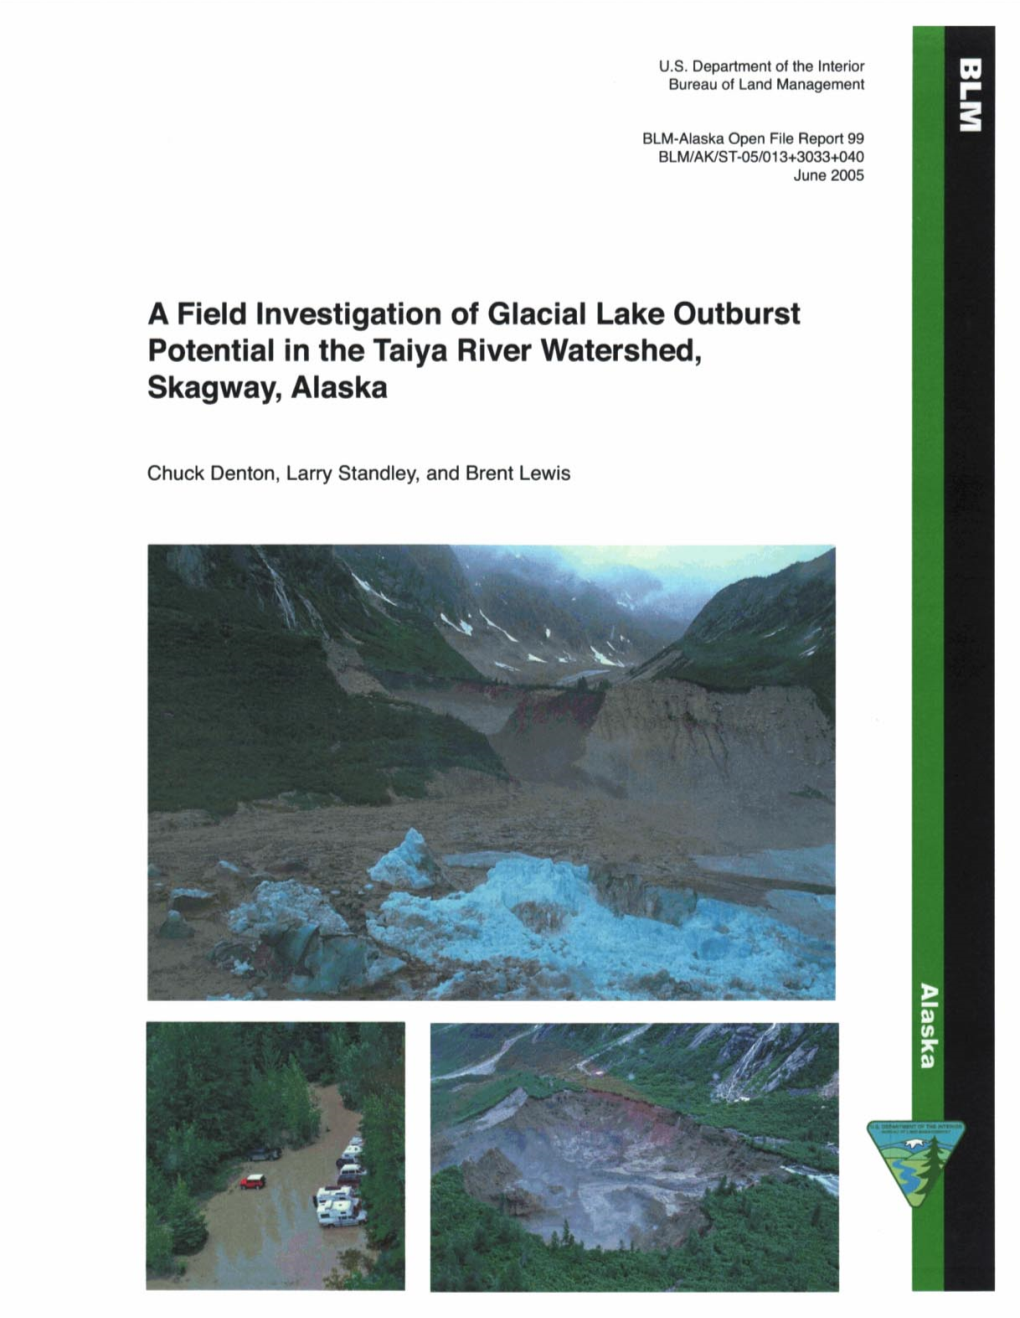 A Field Investigation of Glacial Lake Outburst Potential in the Taiya River Watershed, Skagway, Alaska